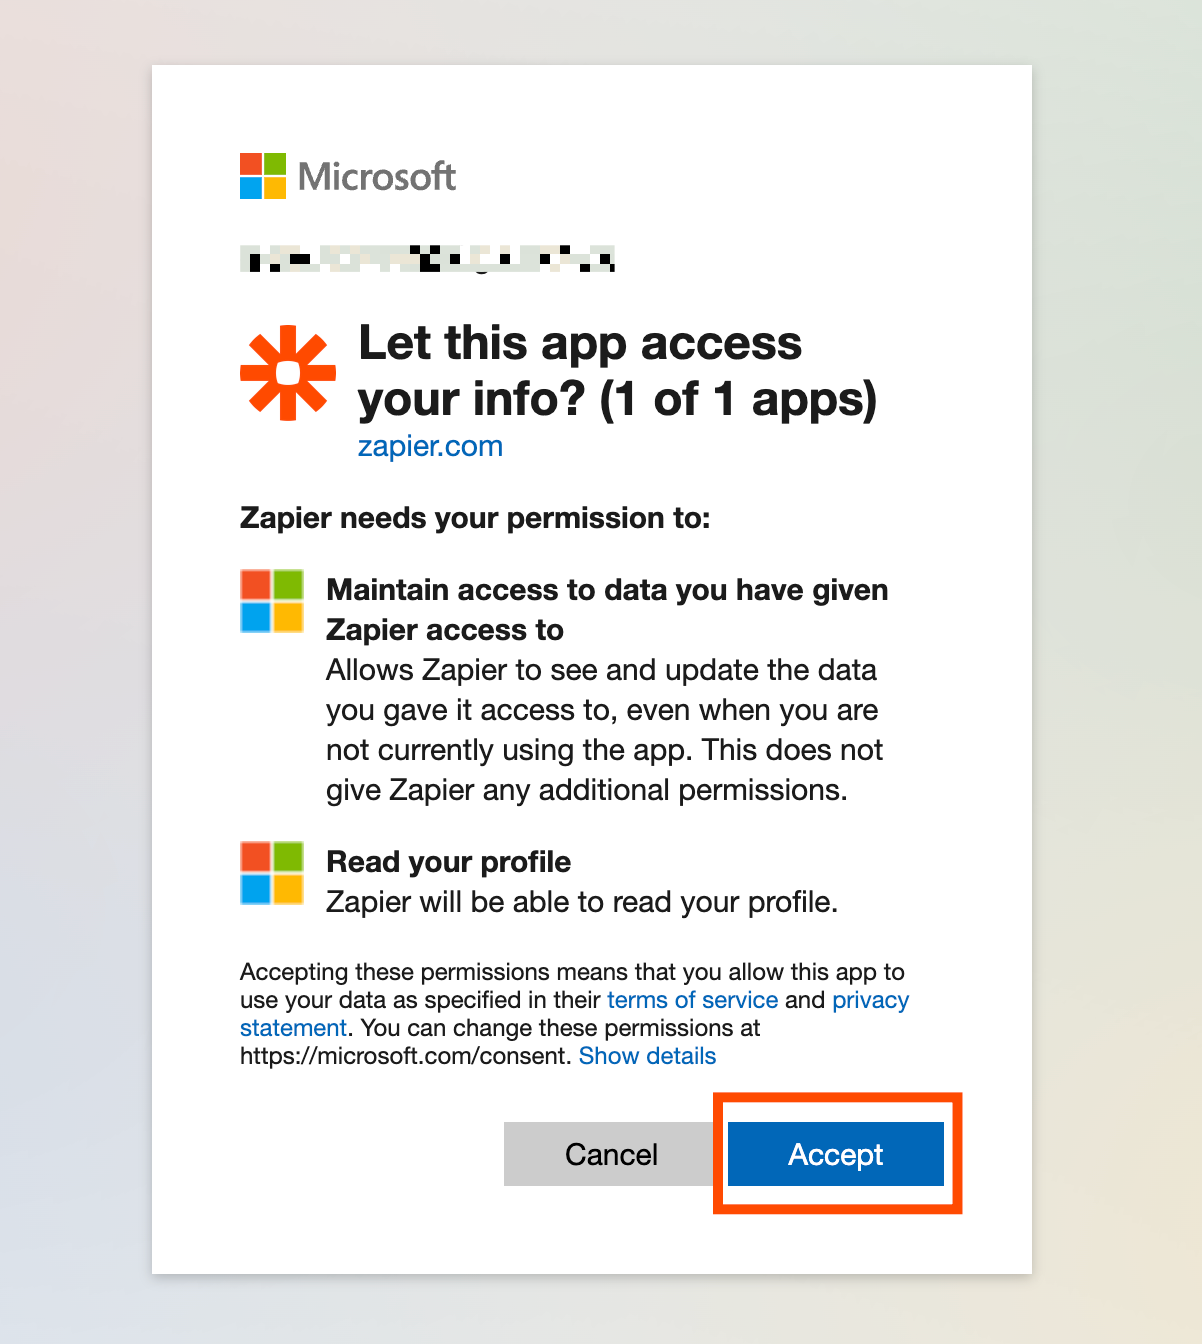 A screenshot of the permissions pop-up to connect Zapier to Microsoft, with the "Accept" button highlighted.